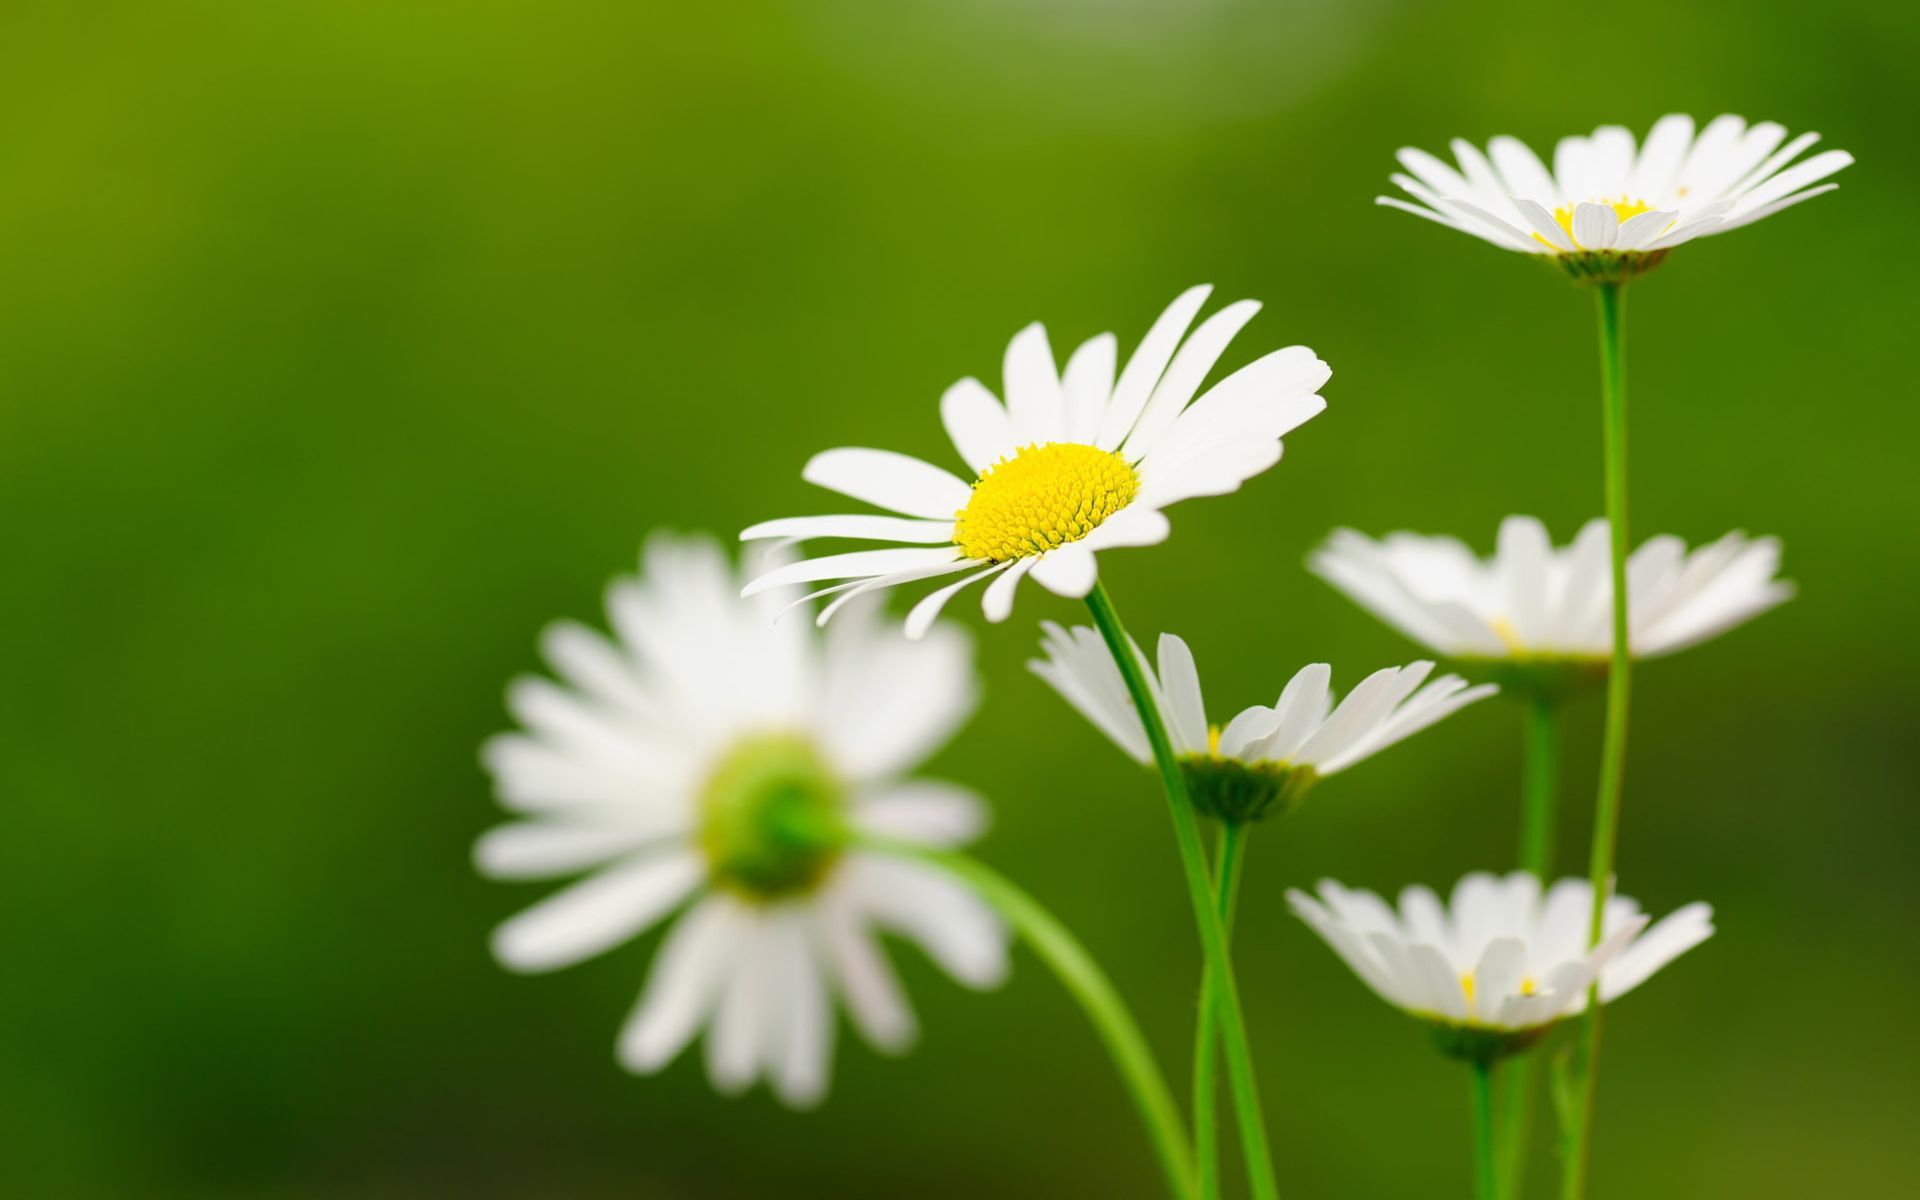 Daisy Flower Wallpapers HD Pictures | One HD Wallpaper Pictures ...